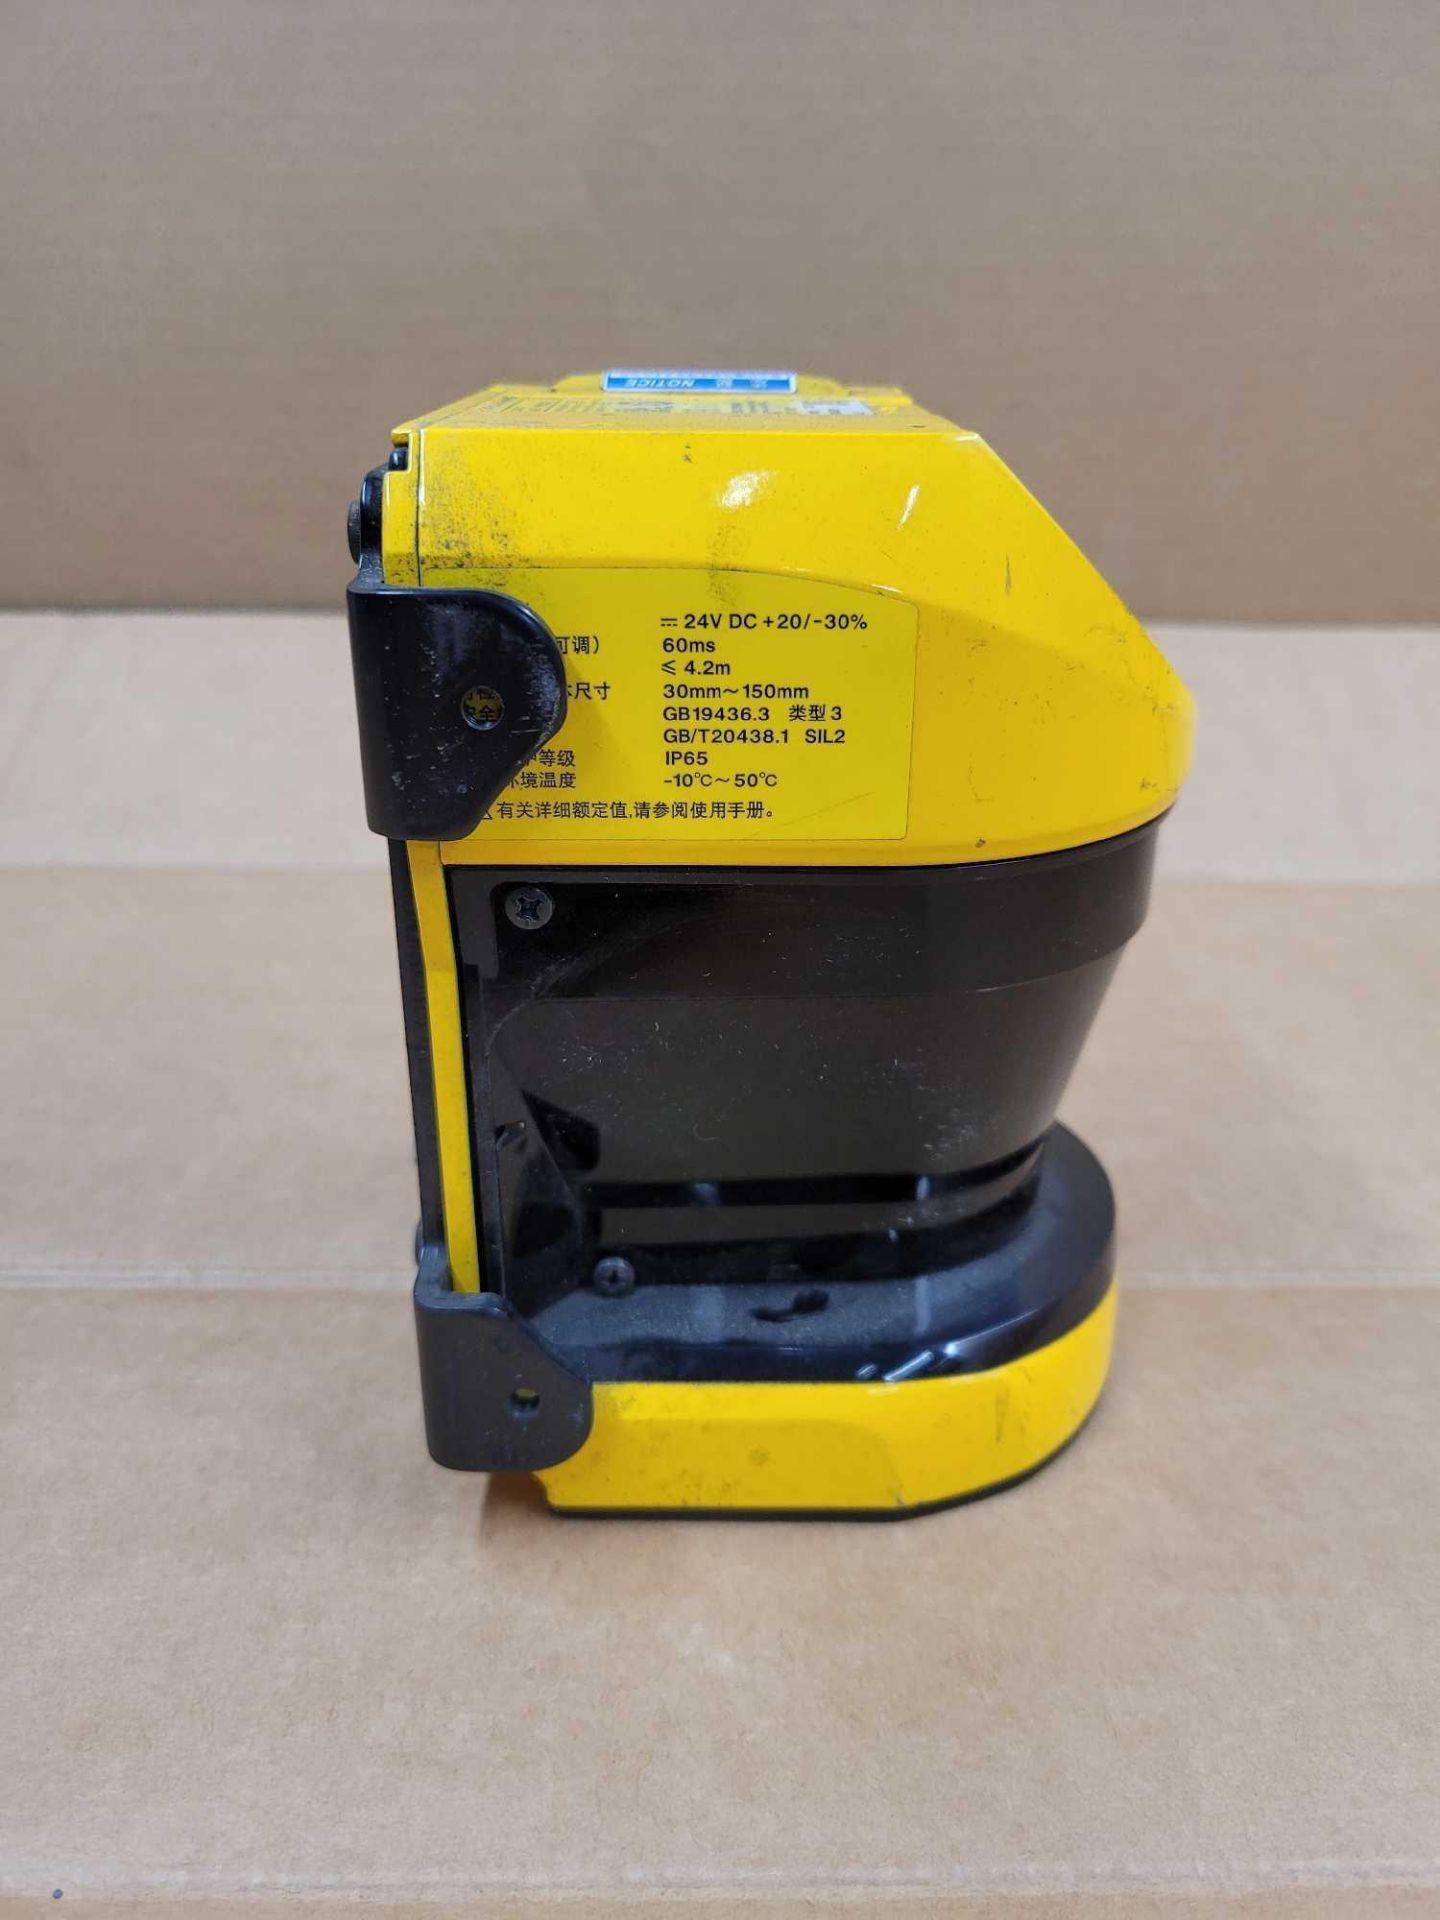 KEYENCE SZ-16V / Safety Laser Scanner  /  Lot Weight: 4.0 lbs - Image 3 of 7